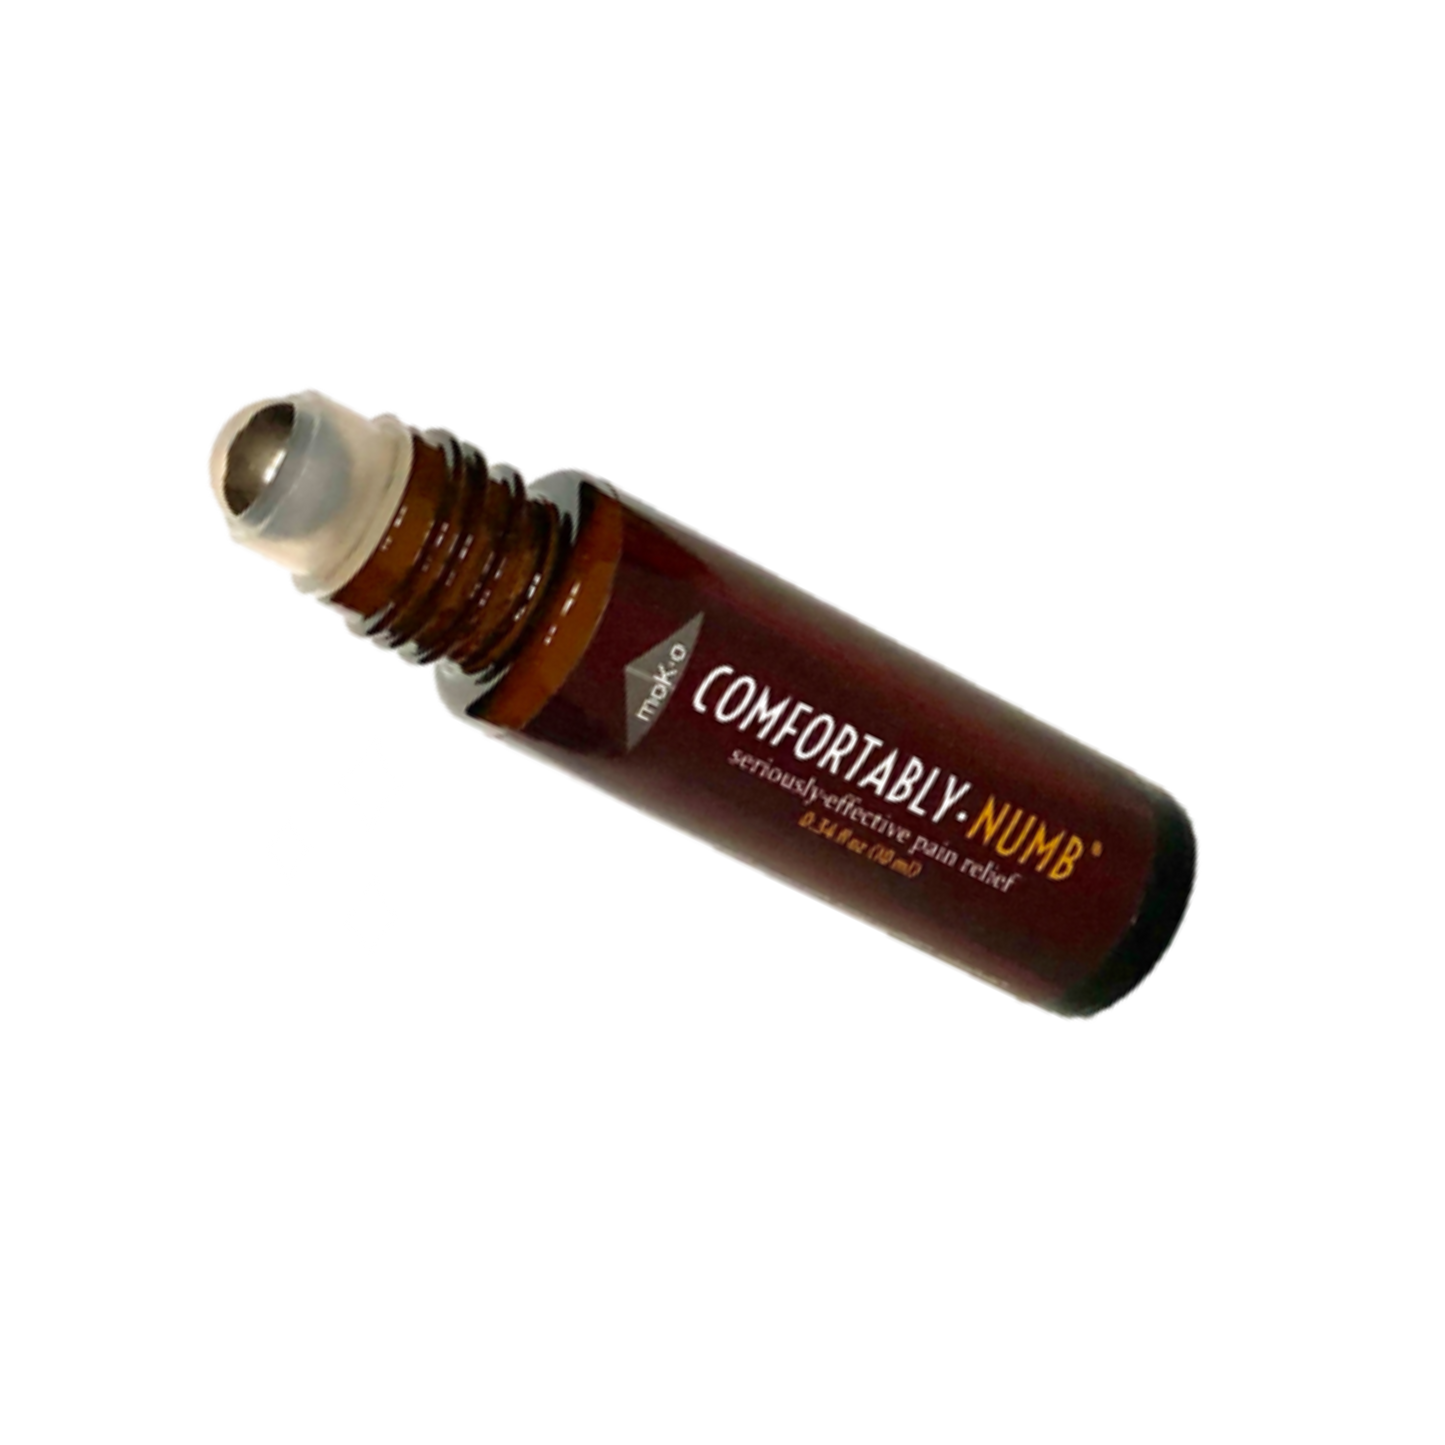 Comfortably Numb® seriously-natural pain reliever is bottled in a glass roll-on  bottle with a steel roller ball. to roll on pain or injury easily. 